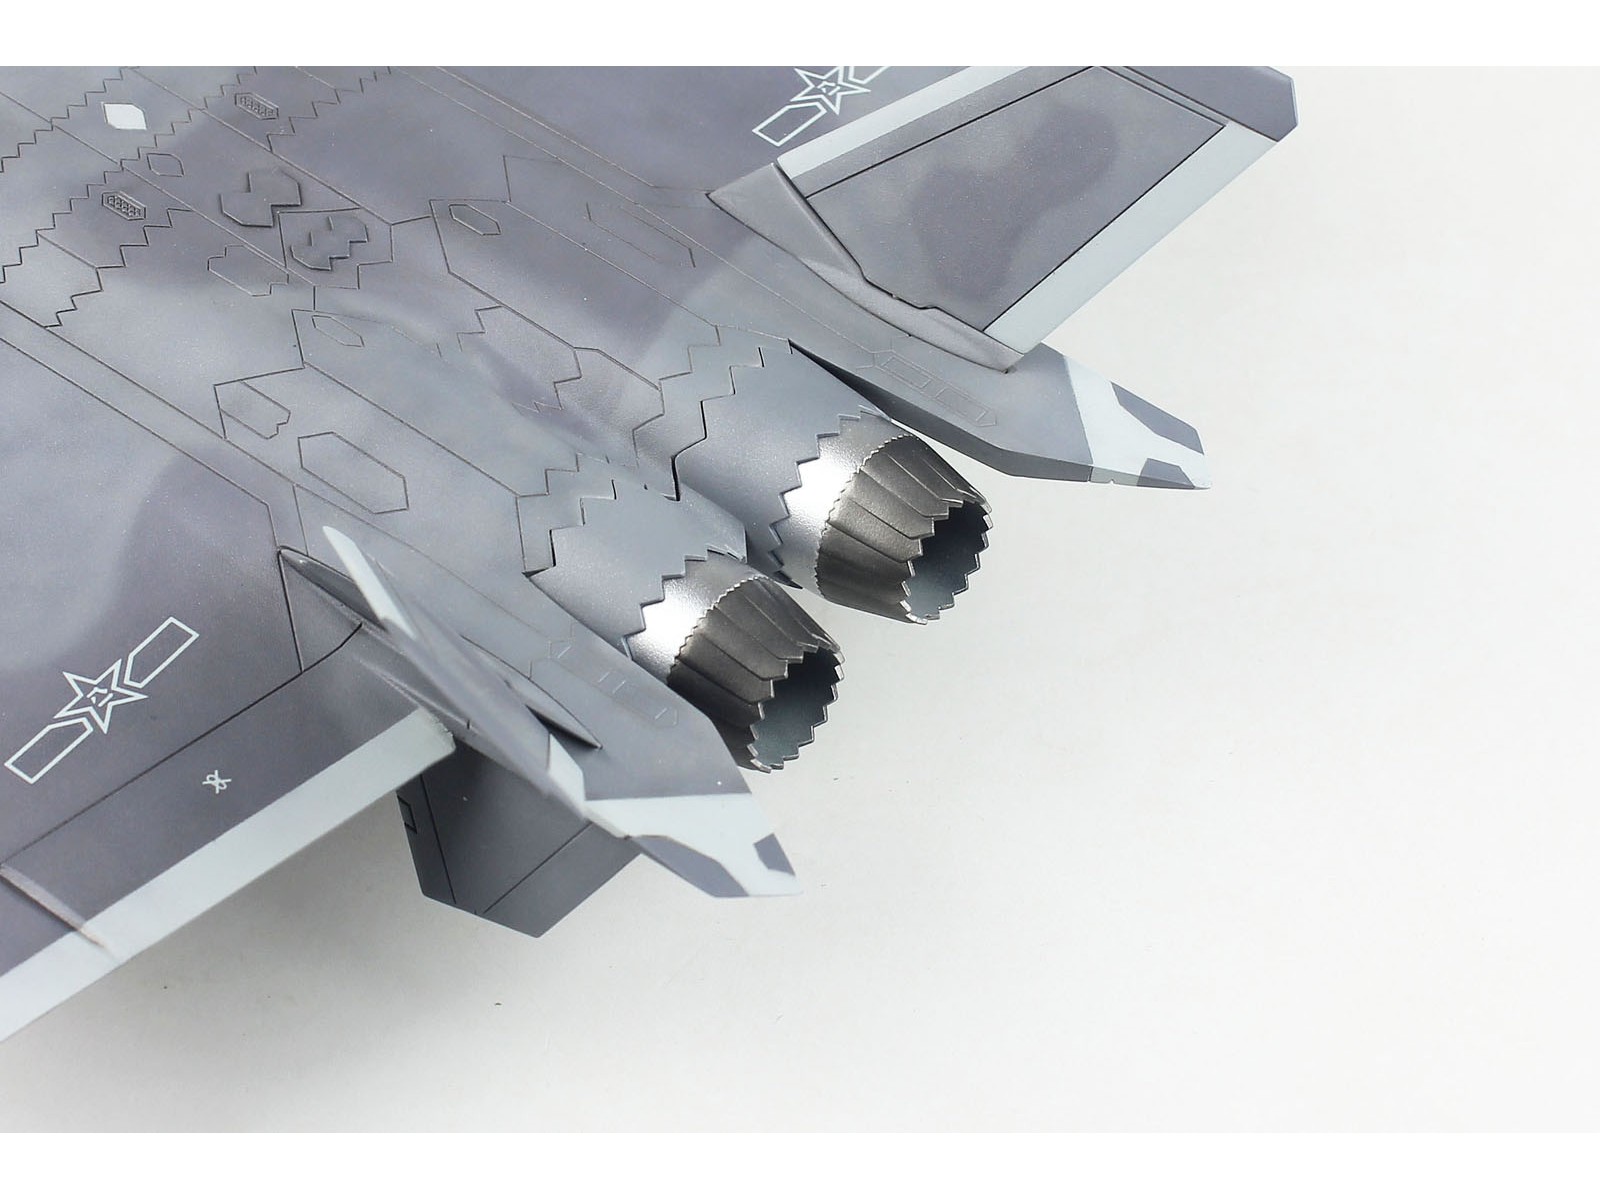 NEW 1:72 Scale CHINESE J-20 "Mighty Dragon" J-20 Stealth fighter Model Kit 